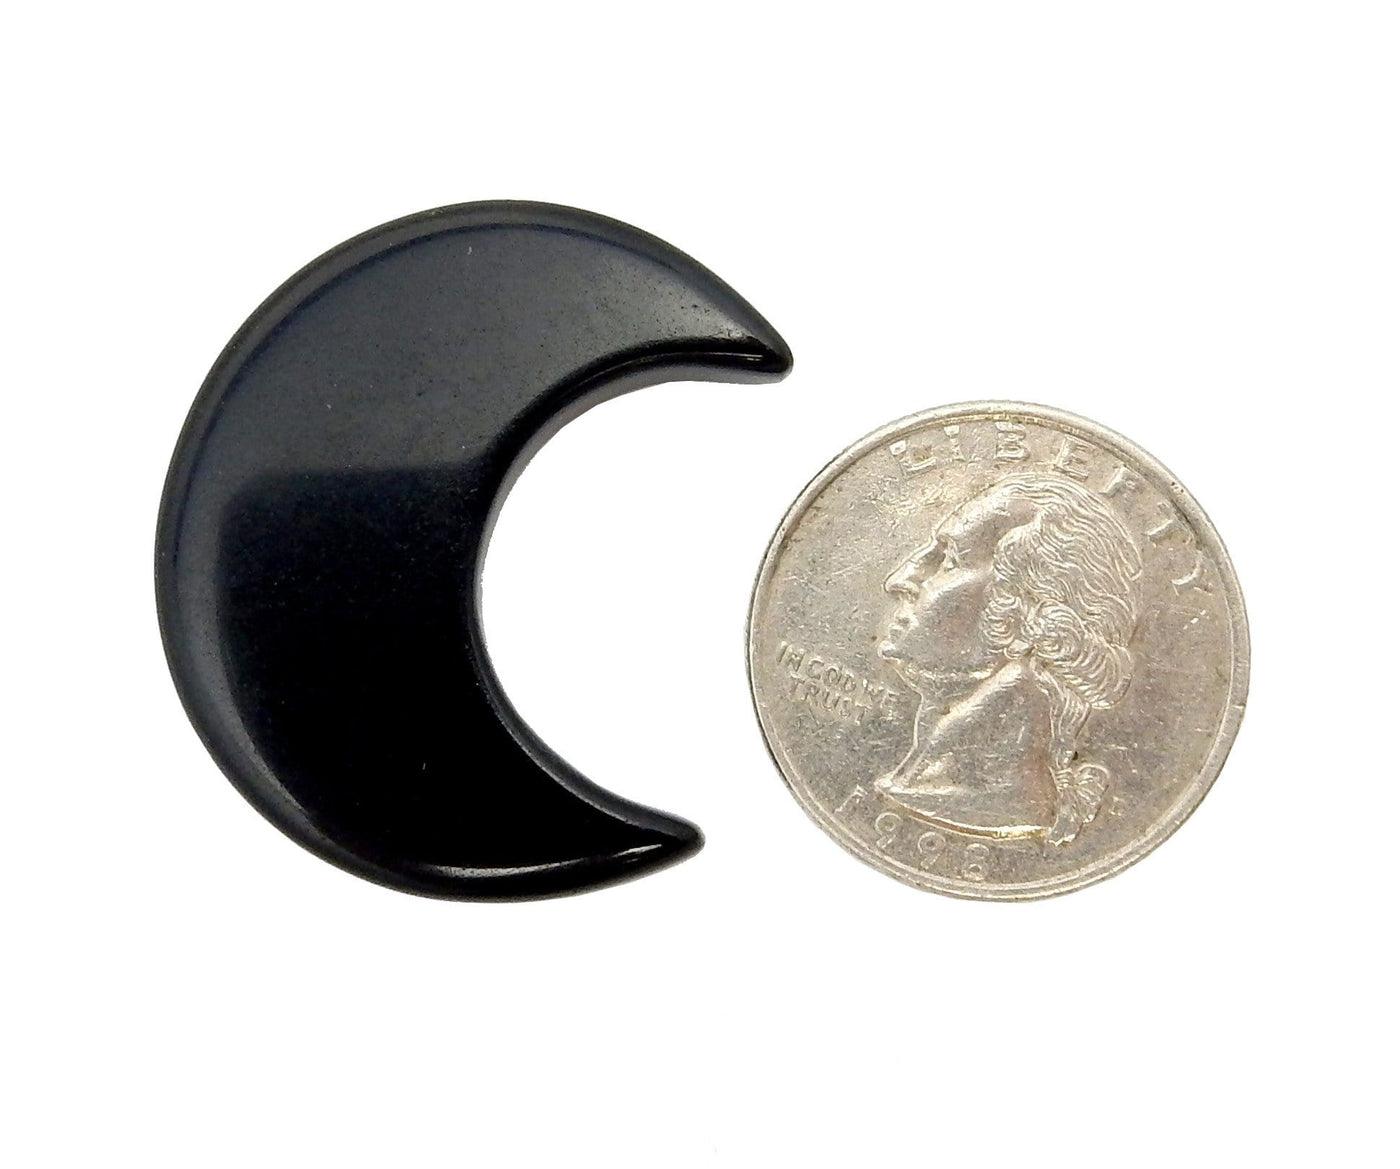 Black Obsidian Half Crescent Moon - Drilled displayed next to a quarter for size reference.